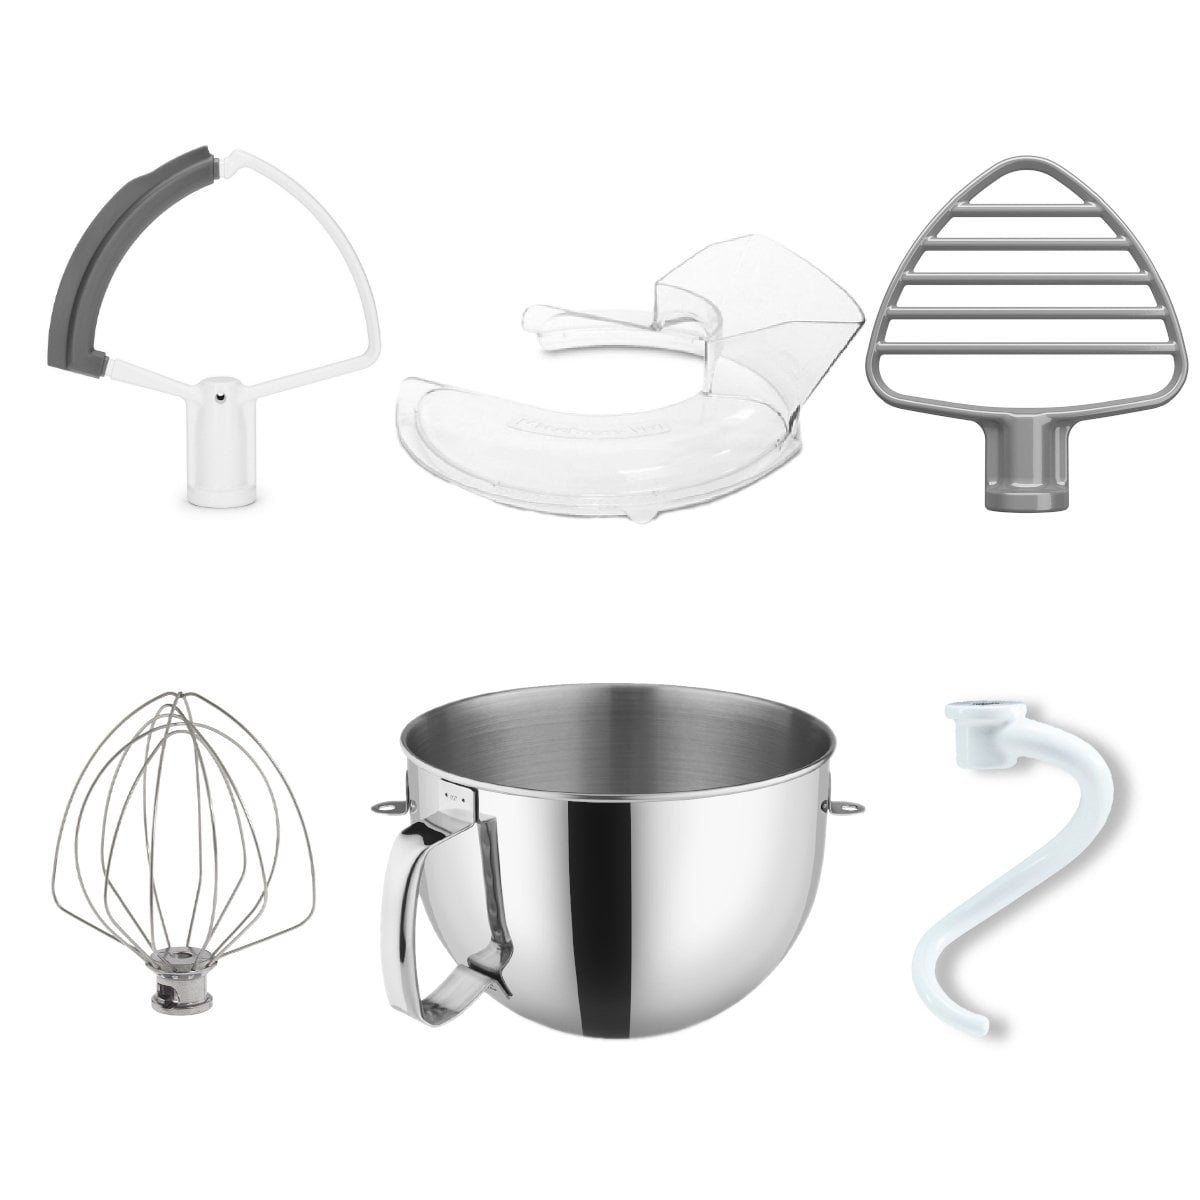 6-Quart Stainless Steel Bowl w/Handle + Accessory Pack, KitchenAid